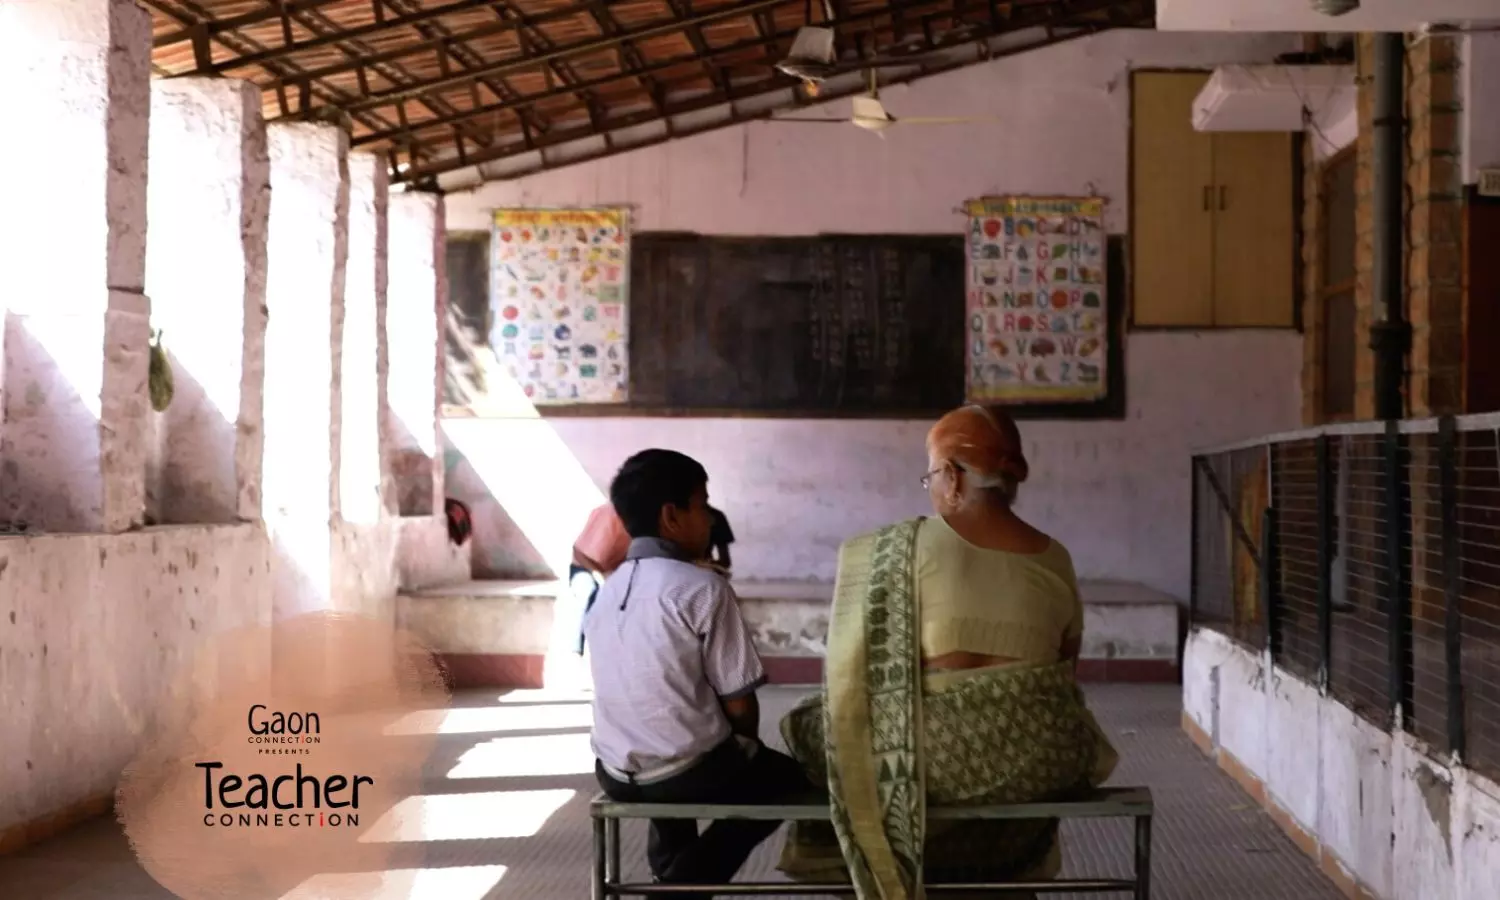 “I learnt to read and write at the age of fifteen. And I am a teacher today.”